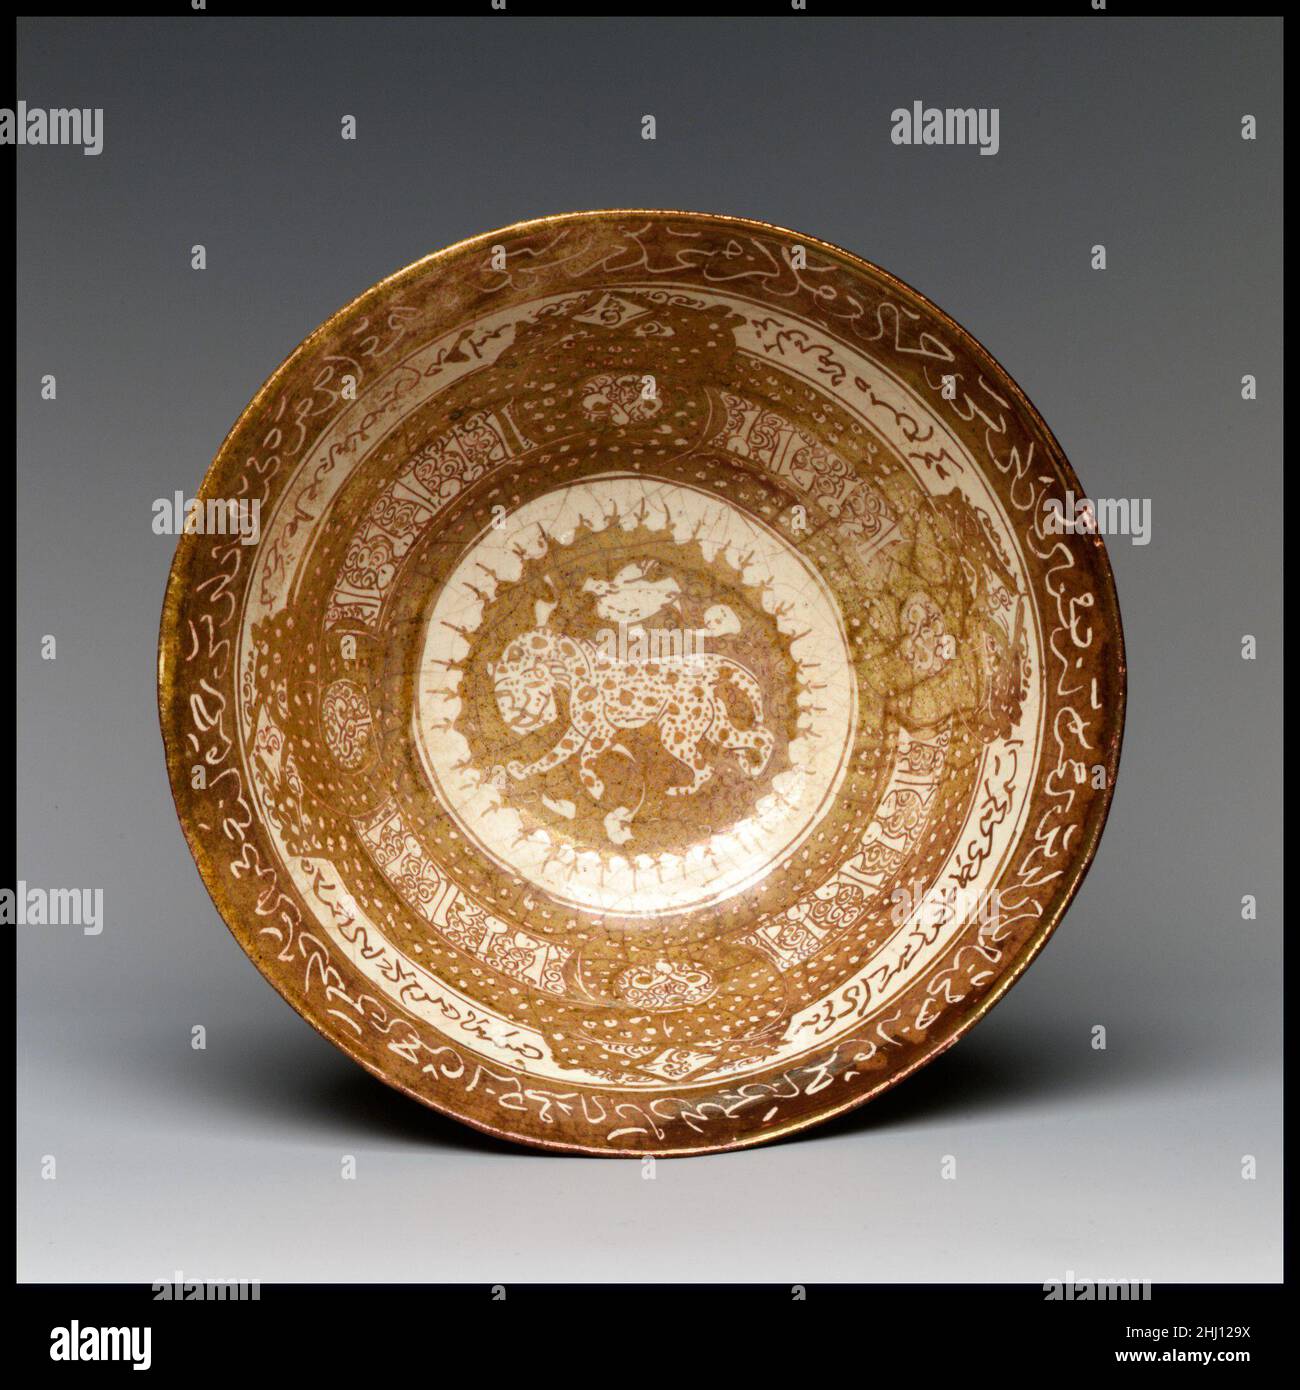 Bowl with Leopard early 13th century The lion was a symbol of power, strength, and royalty. Its reigning planet is the Sun, which is shown here as a circular disk against which the whimsically spotted lion is set. The bowl was made in Kashan, in central Iran, where the technology for making luster-glazed ceramics was introduced in the early twelfth century, with the arrival of the potters from Egypt who carried the secret knowledge for creating this decorative effect.. Bowl with Leopard. early 13th century. Stonepaste; luster-painted on opaque white glaze. Attributed to Iran, Kashan. Ceramics Stock Photo